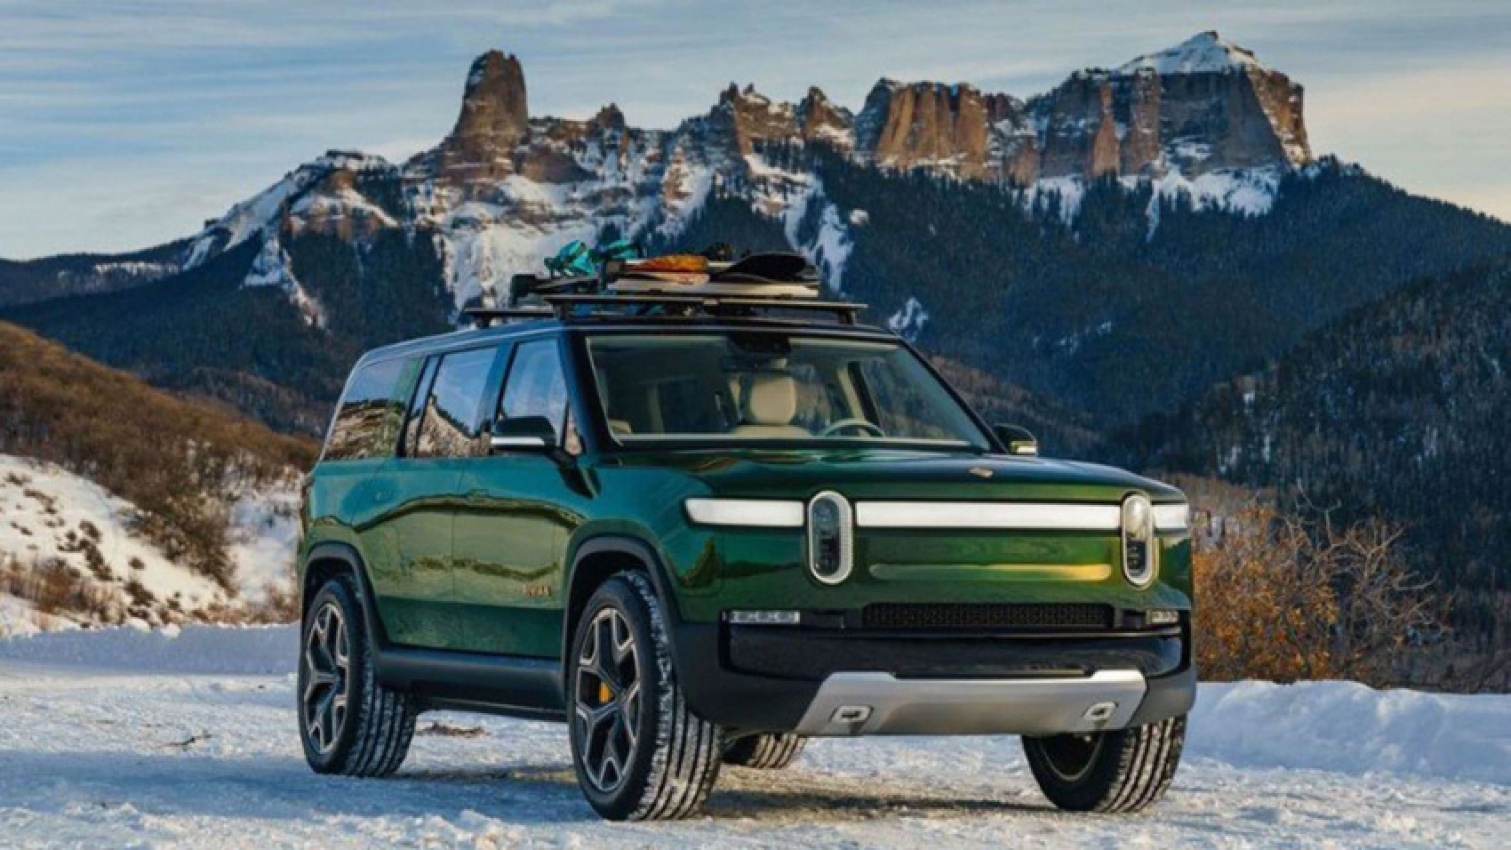 autos, cars, acura, audi, best cars, chevrolet, crossover, driving, electric, ford, honda, hybrid, jeep, land rover, luxury, off-road vehicles, rivian, safety, toyota, truck, volvo, wagon, best cars for snow